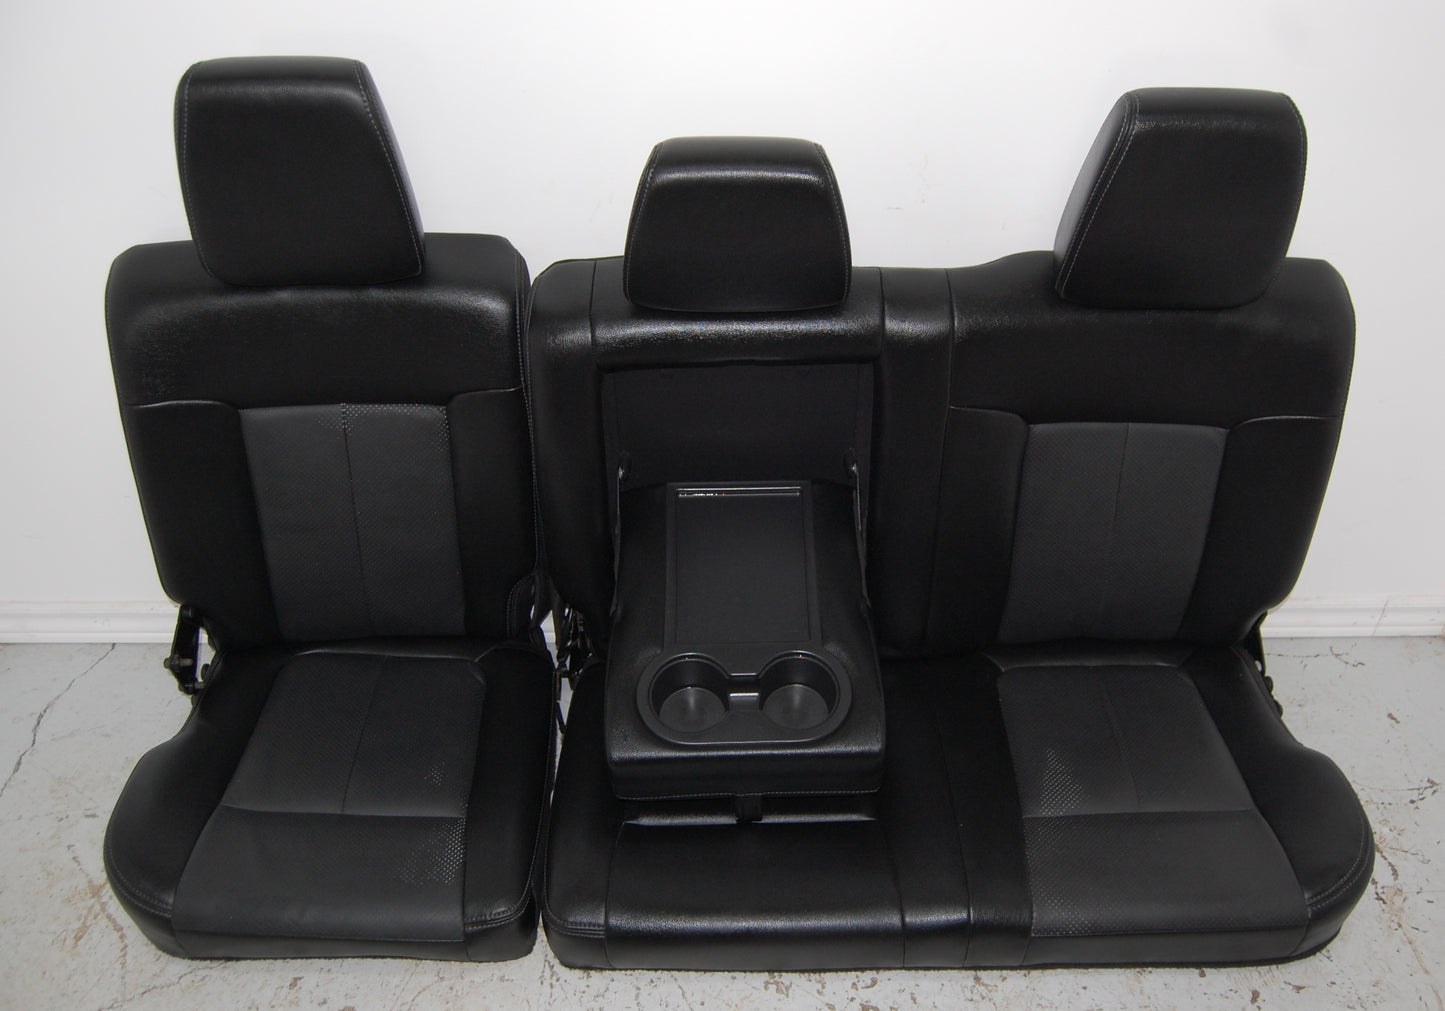 Ford F250 Super Duty BLACK LEATHER Seats Power Heated Cooled F350 F450 Superduty Truck